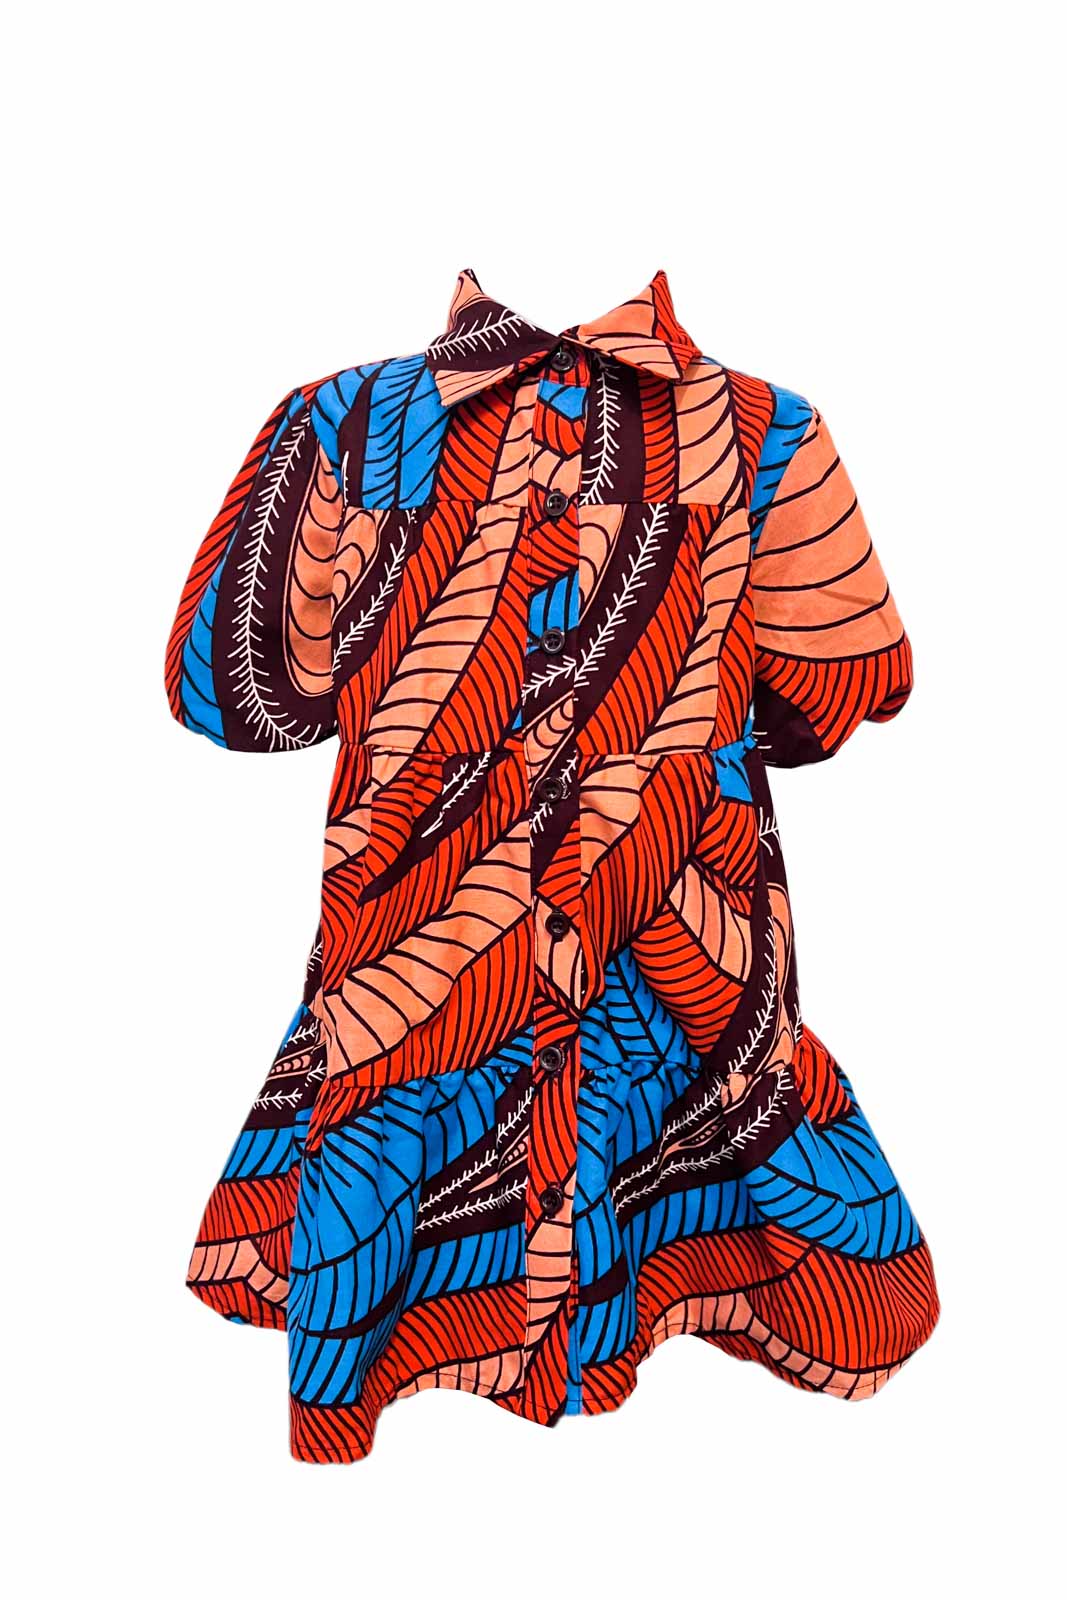 Cataleya Panelled Dress - Coral/Red/Blue Dragonfly Wings Print